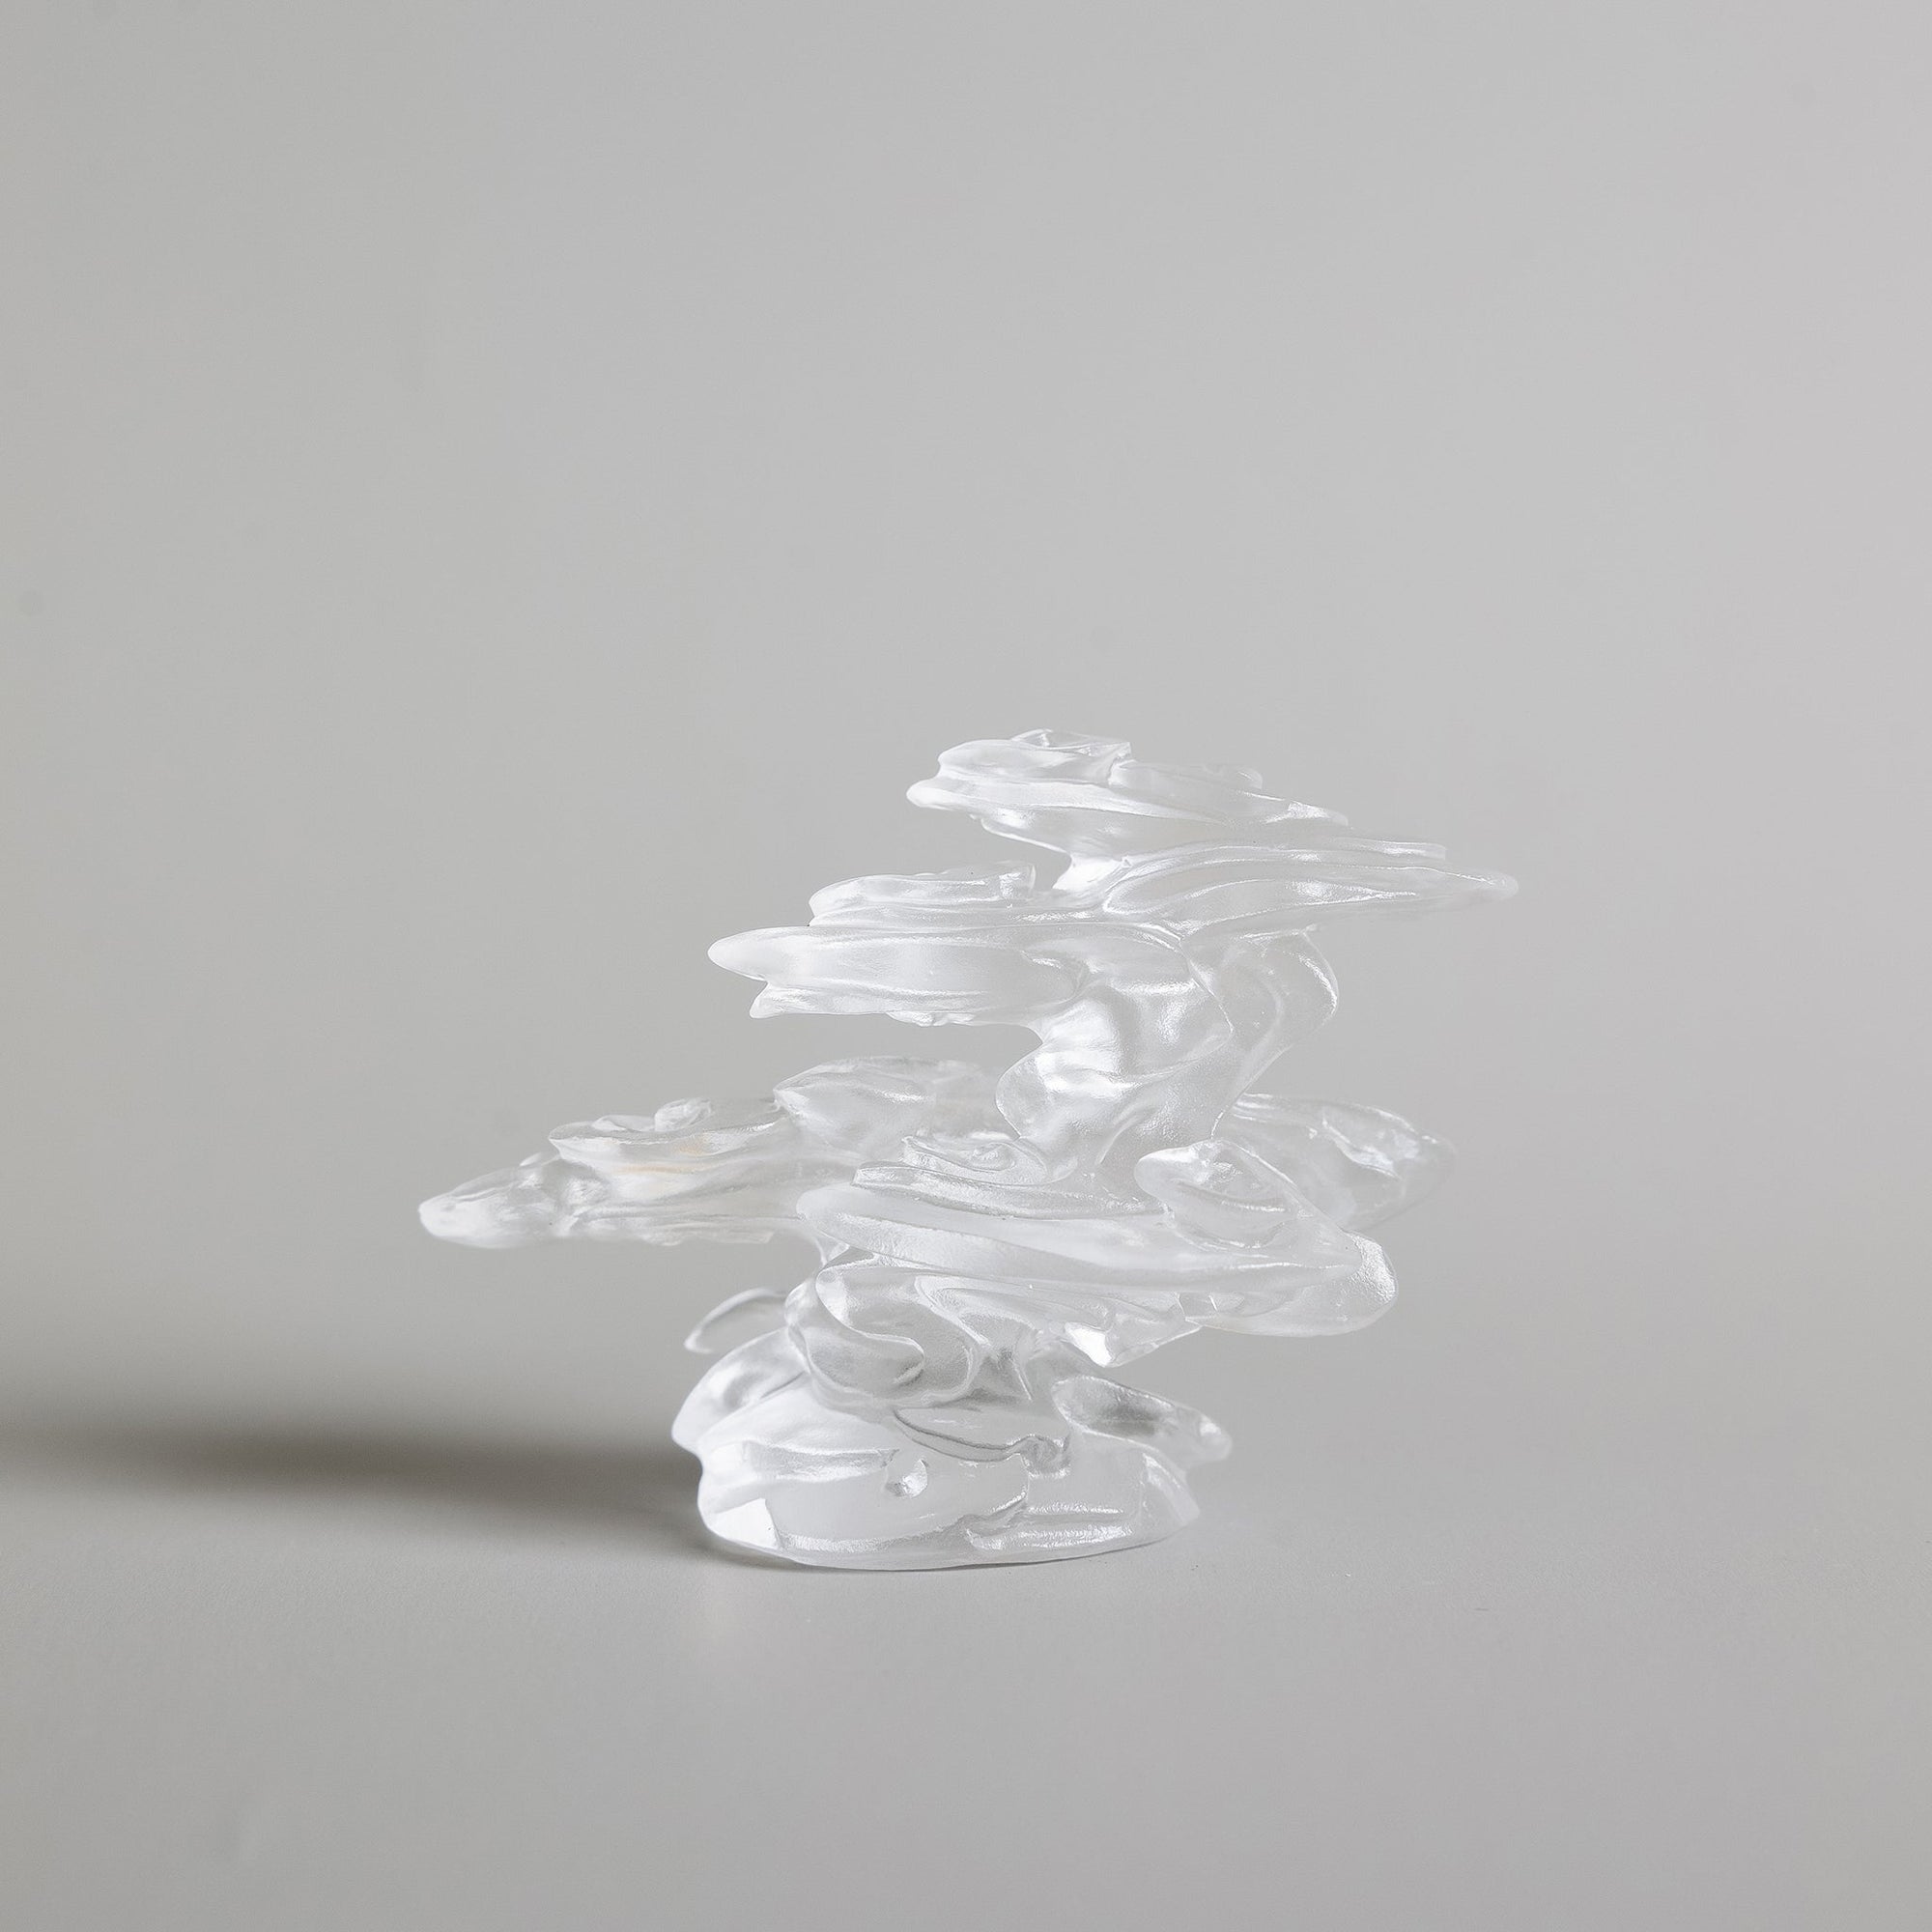 A burning incense stick in a cloud-inspired liuli crystal incense holder